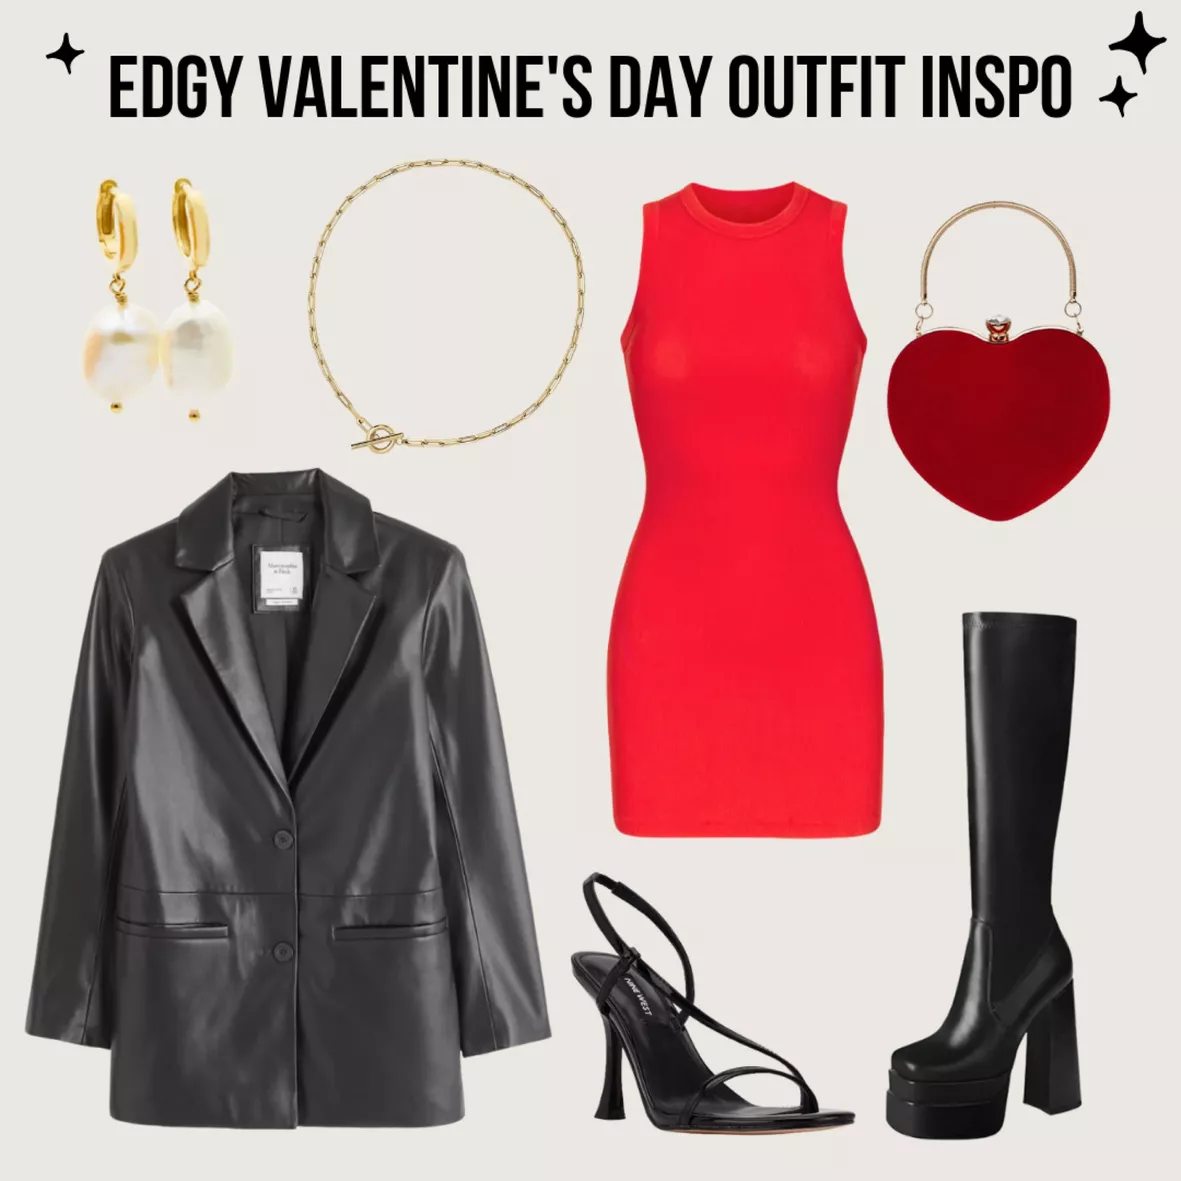 MY EDGY UN-GIRLY VALENTINE'S DAY OUTFIT